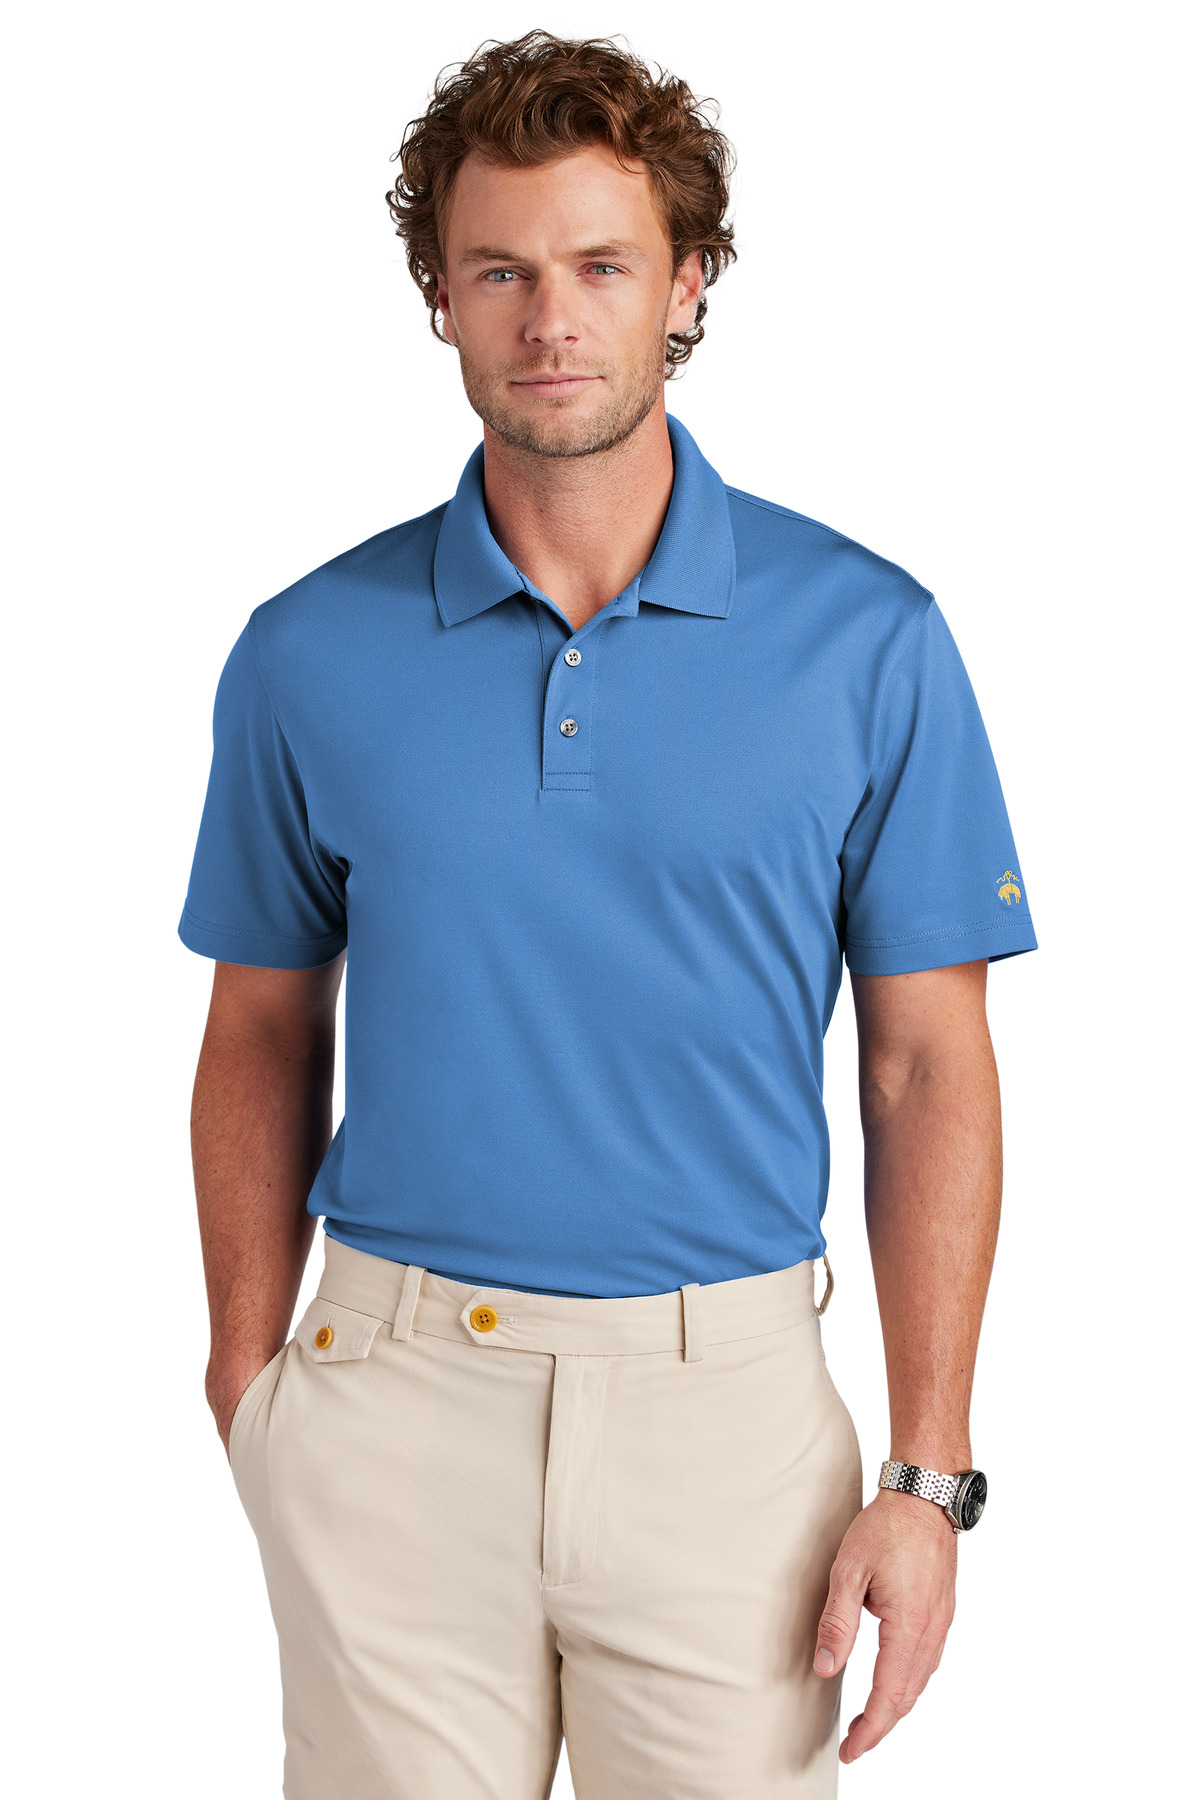 Brooks Brothers Mesh Pique Performance Polo-Brooks Brothers